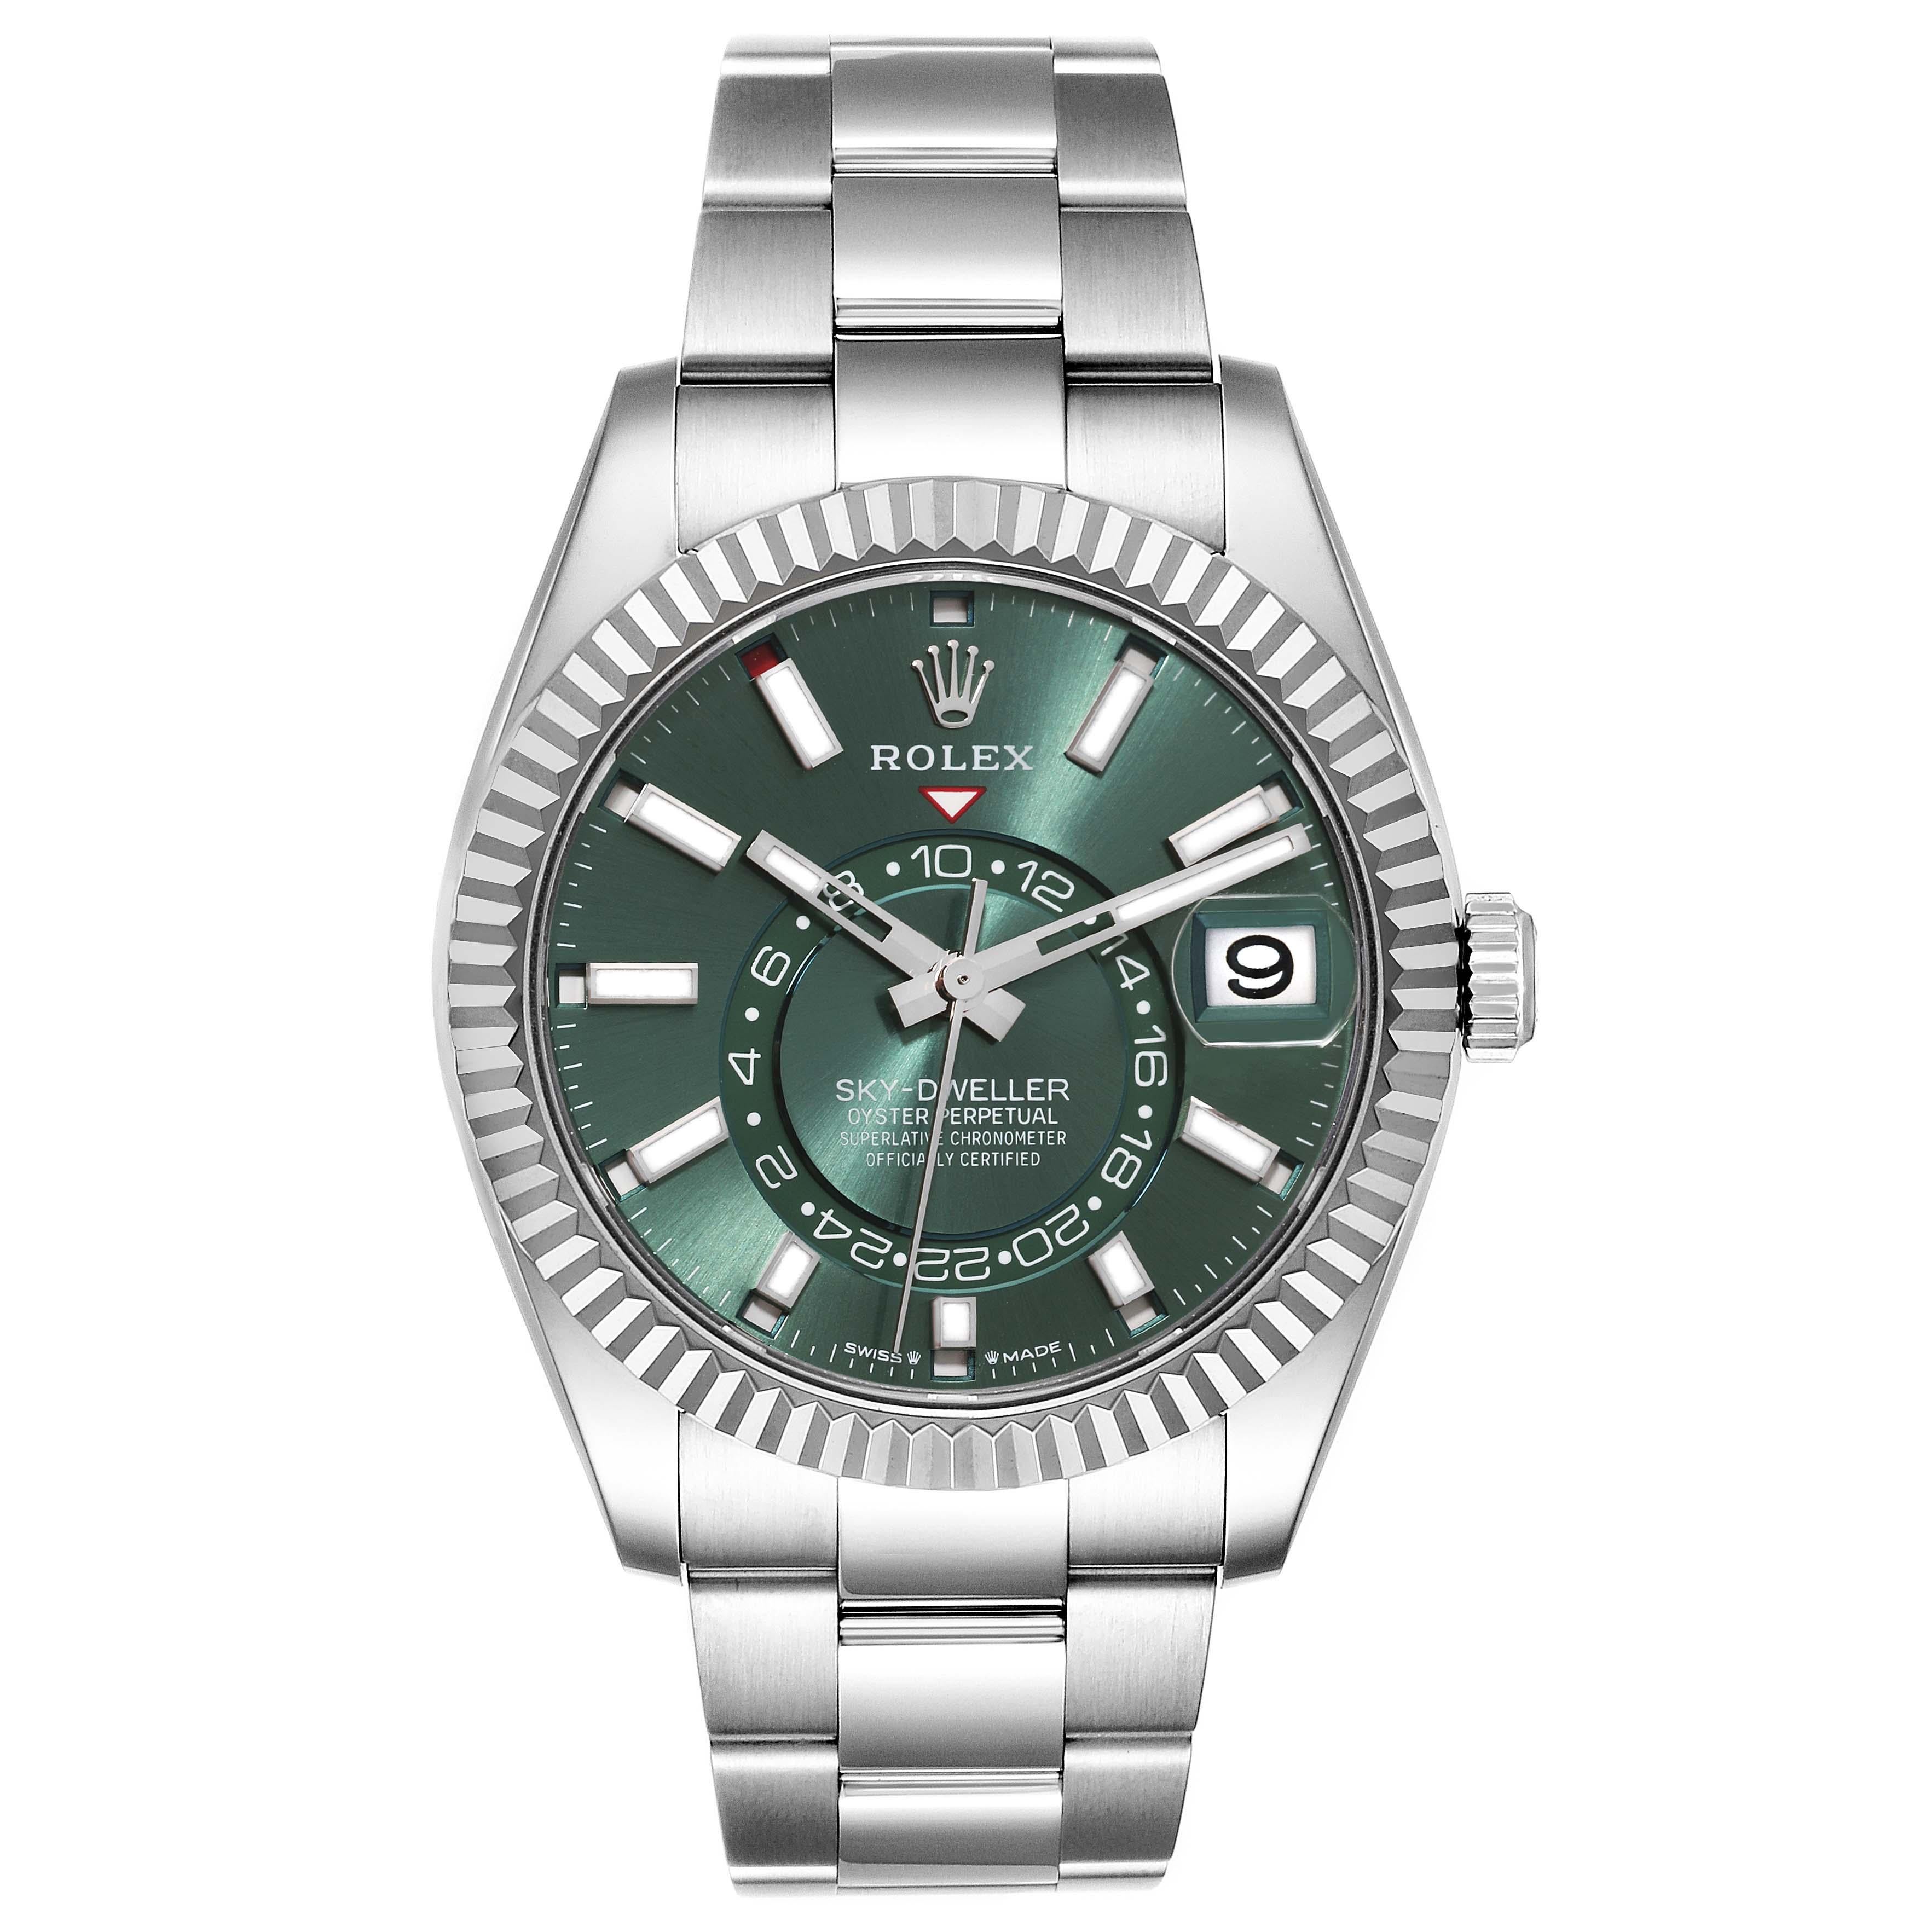 Rolex Sky-Dweller Steel White Gold Mint Green Dial Mens Watch 336934 Unworn. Automatic self-winding movement. Dual time zones, annual calendar. Paramagnetic blue Parachrom hairspring. High-performance Paraflex shock absorbers. Stainless steel case